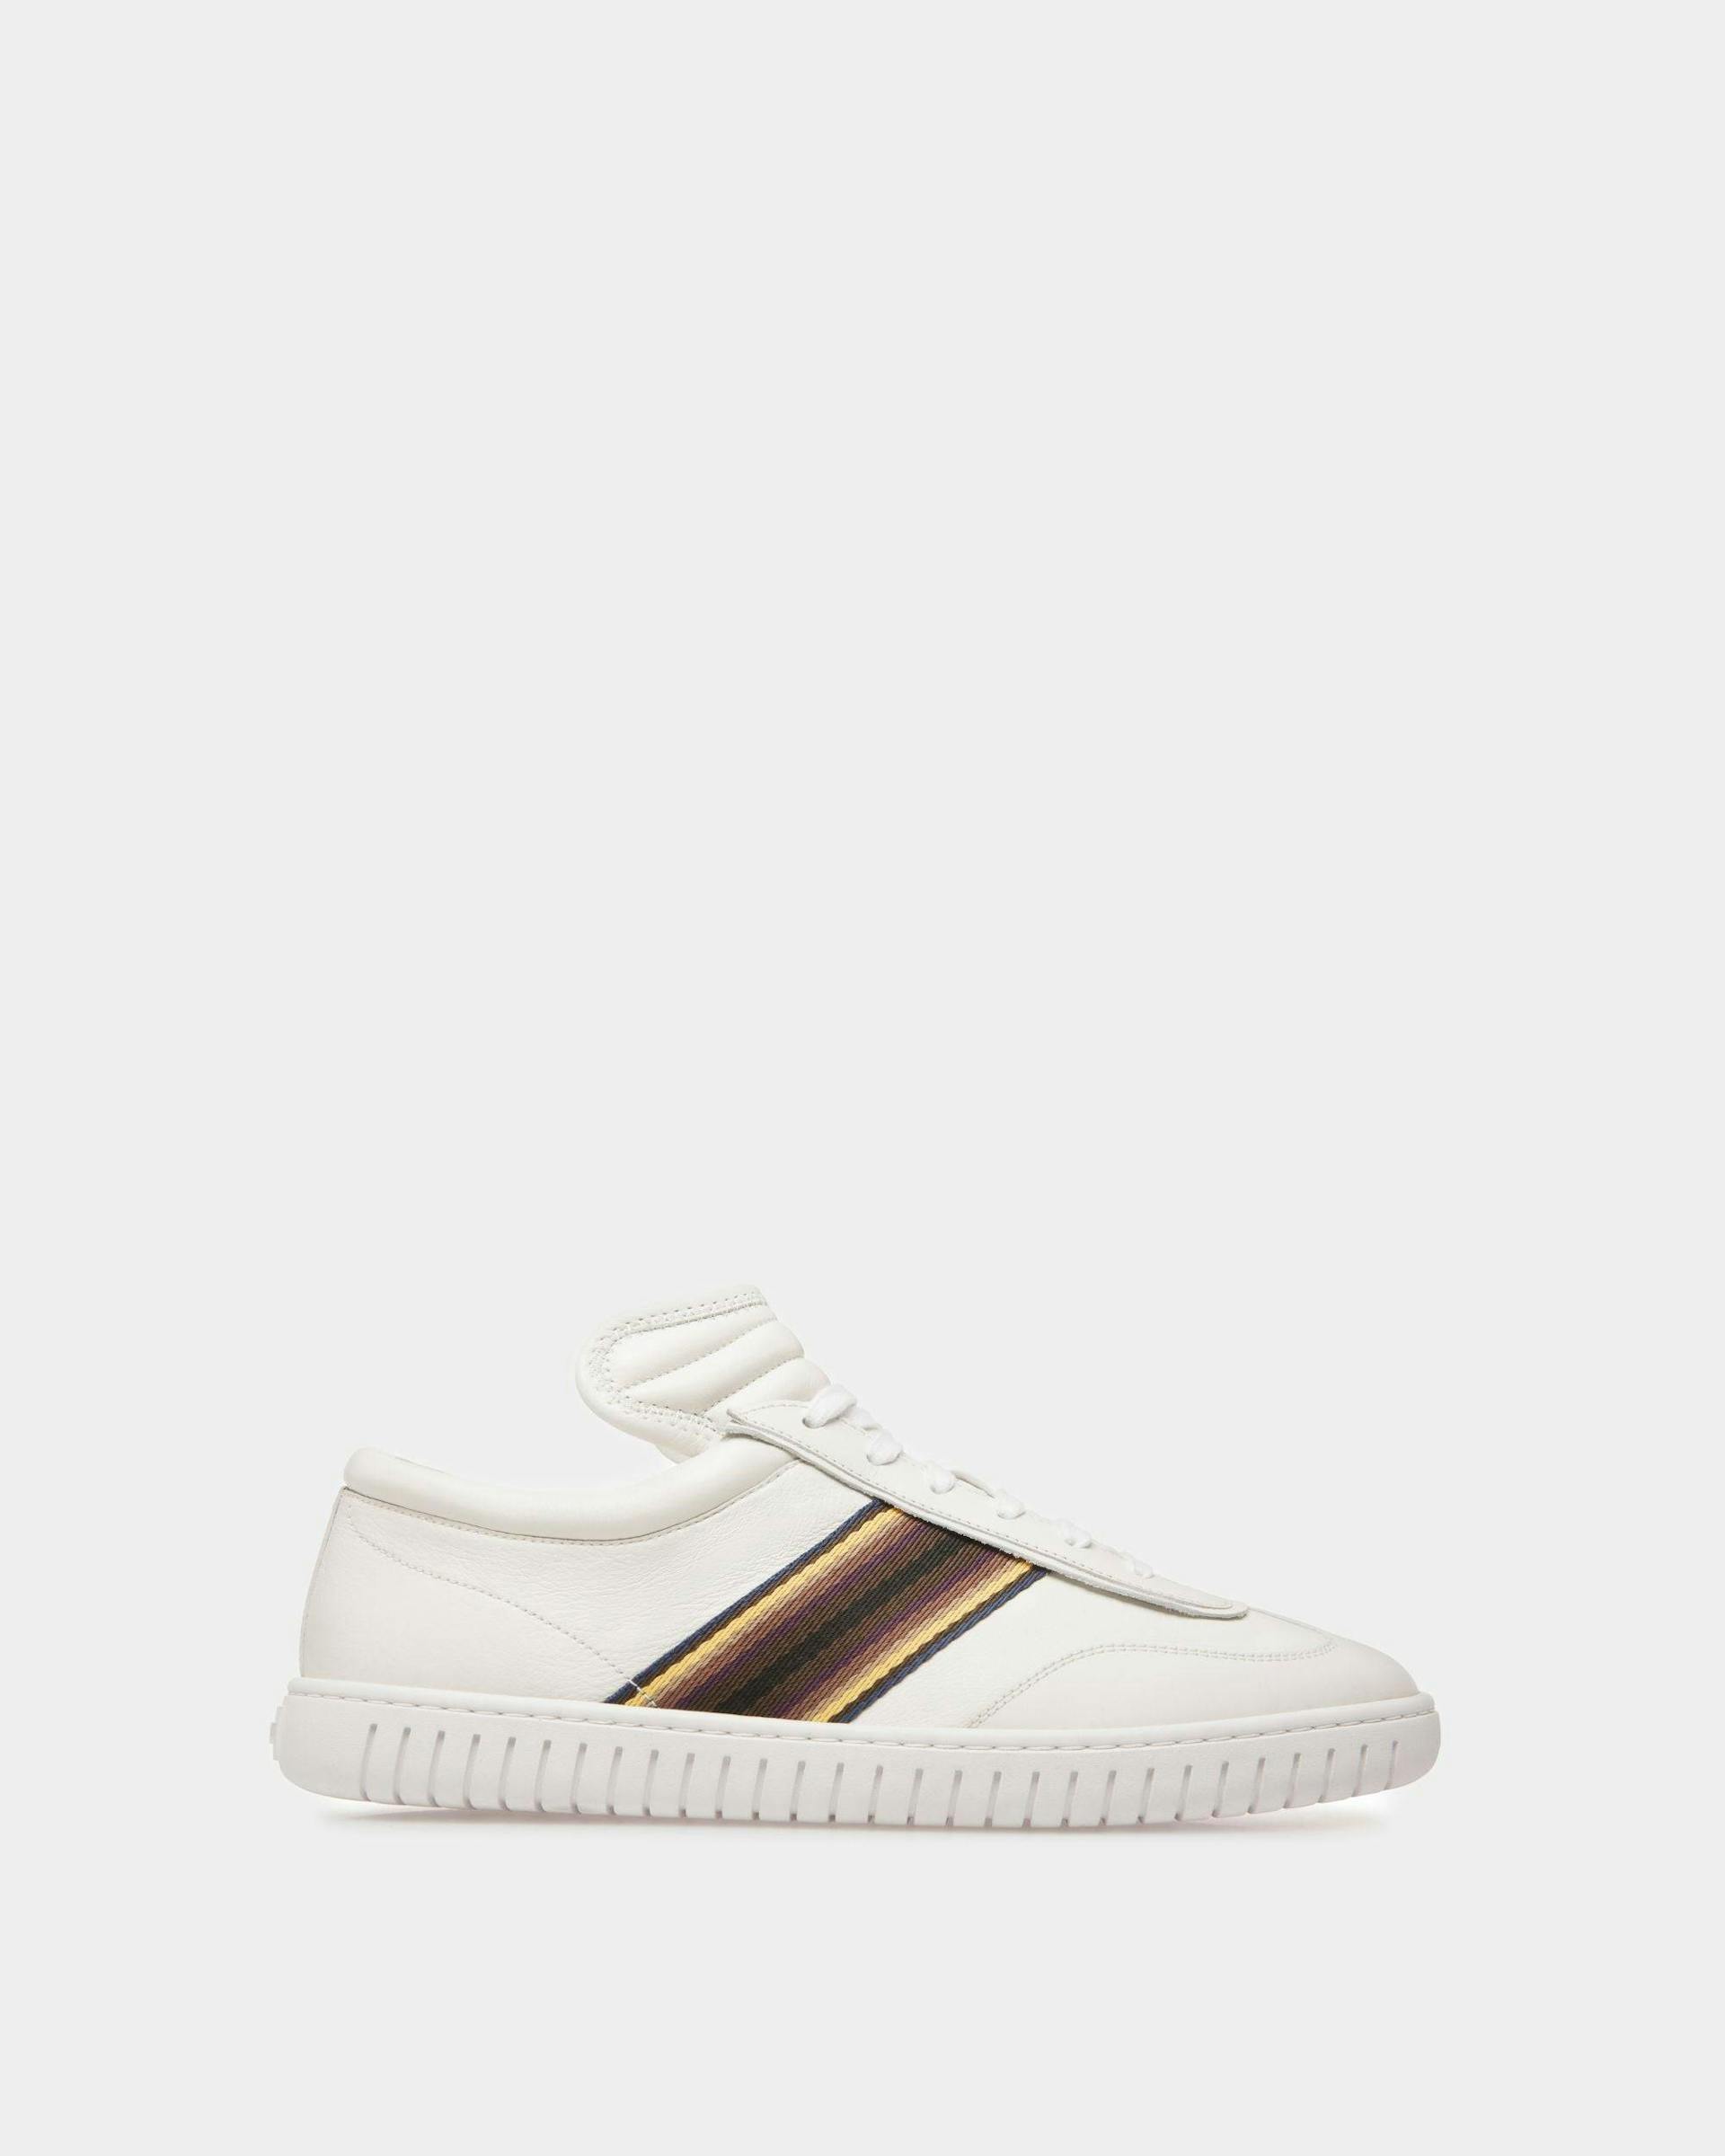 Men's Player Sneakers In White Leather | Bally | Still Life Side